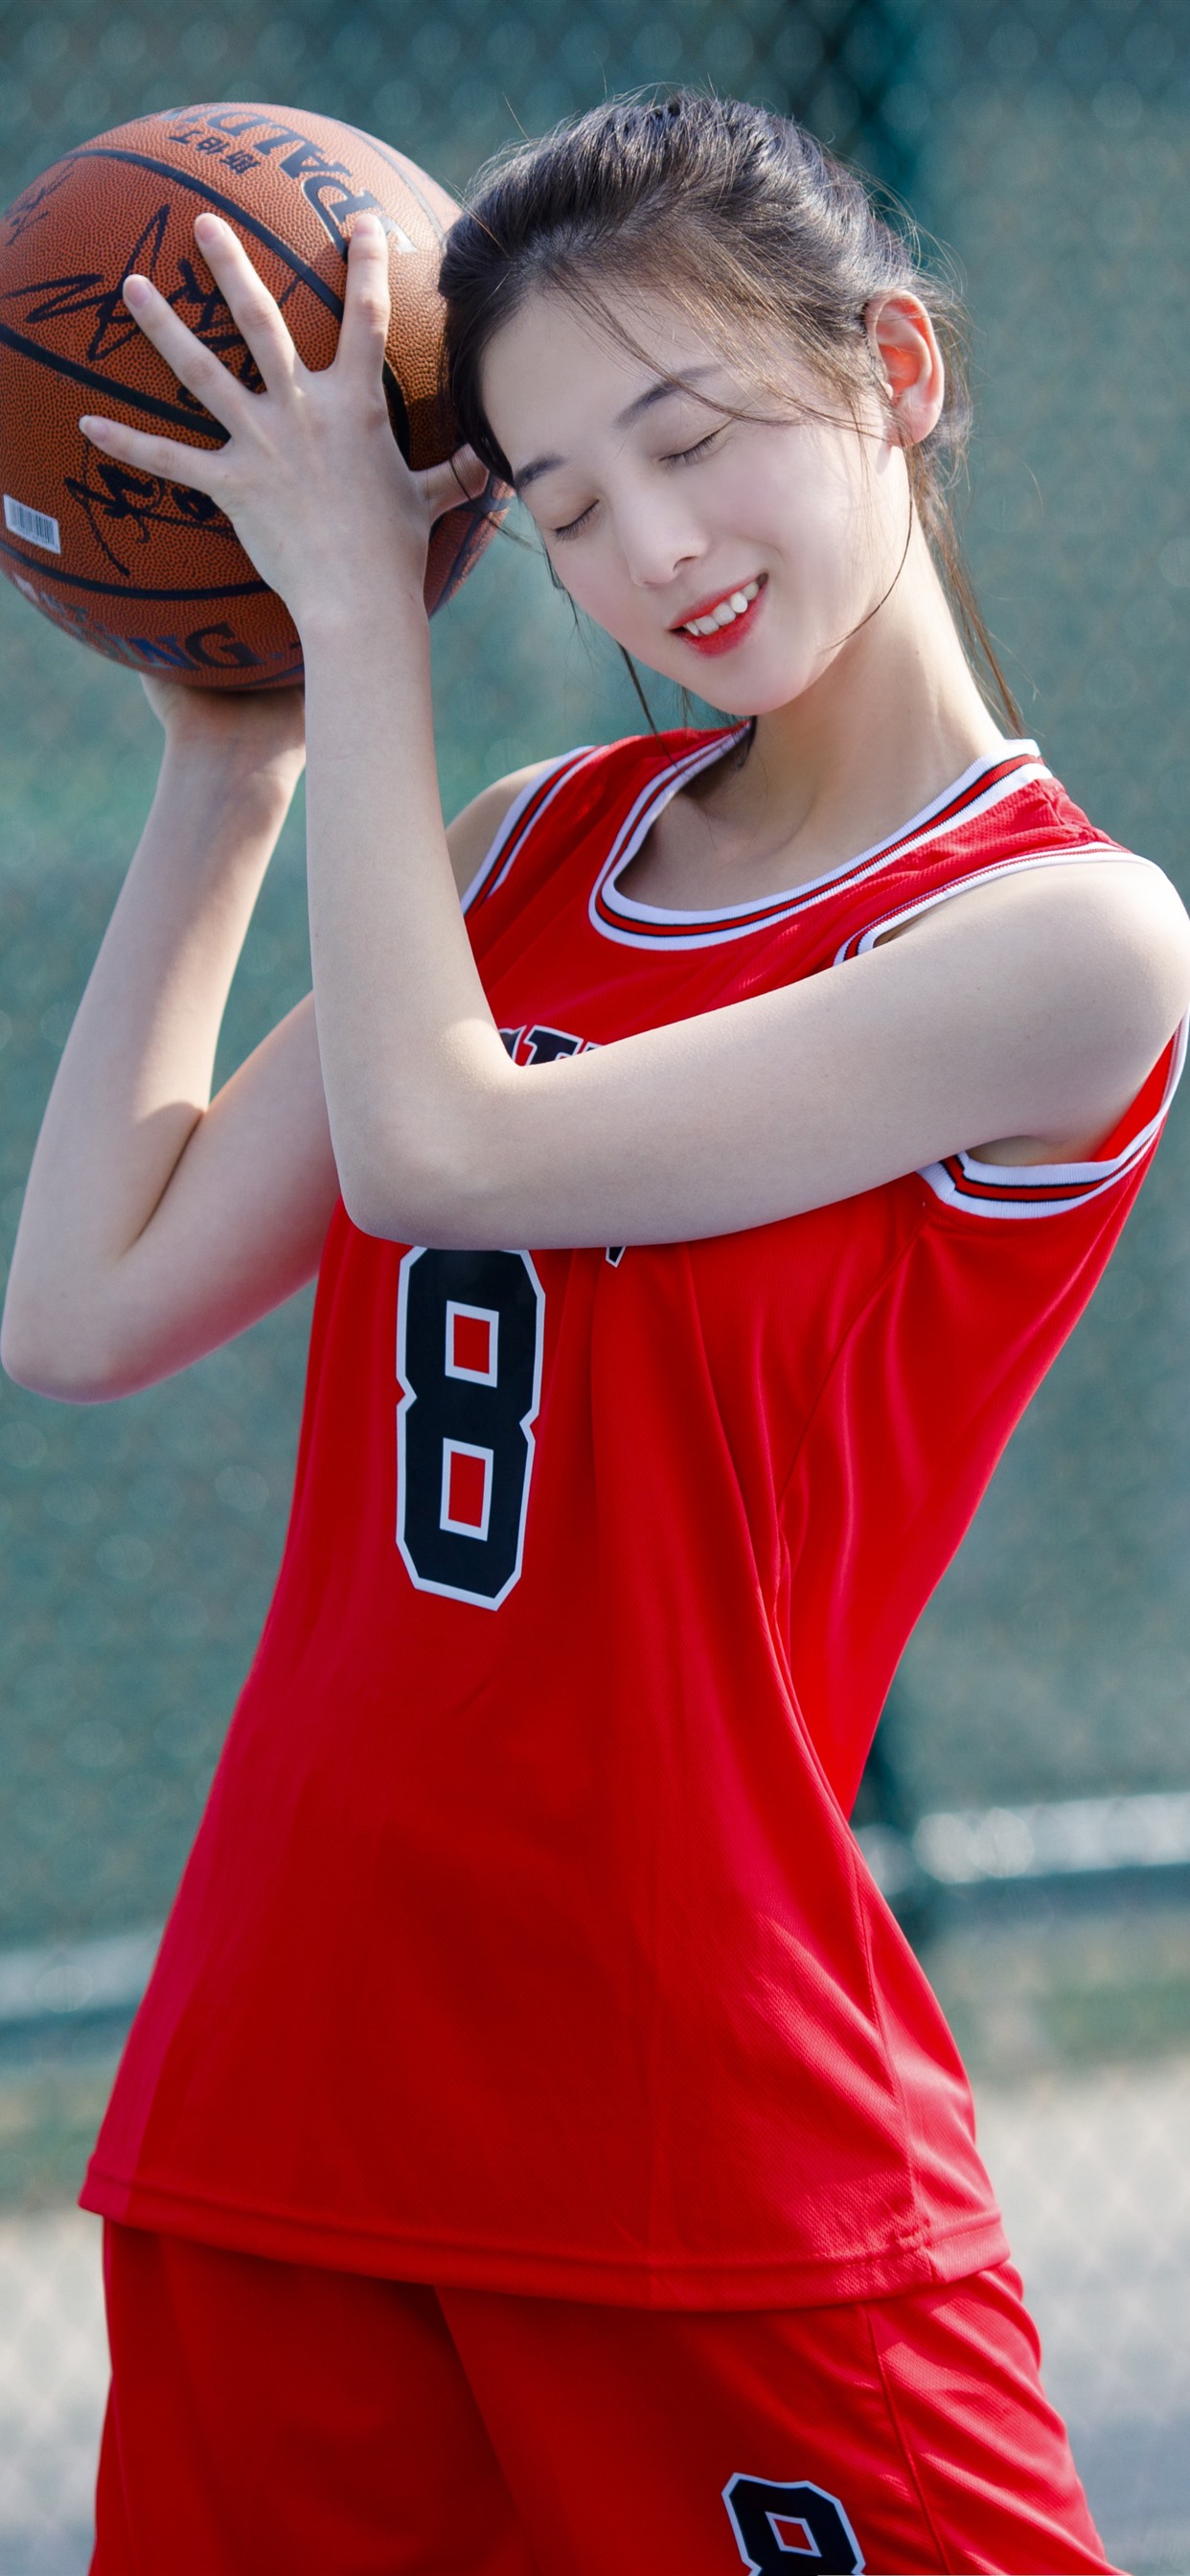 Lovely Young Girl, Basketball, Sport 1242x2688 IPhone 11 Pro XS Max Wallpaper, Background, Picture, Image